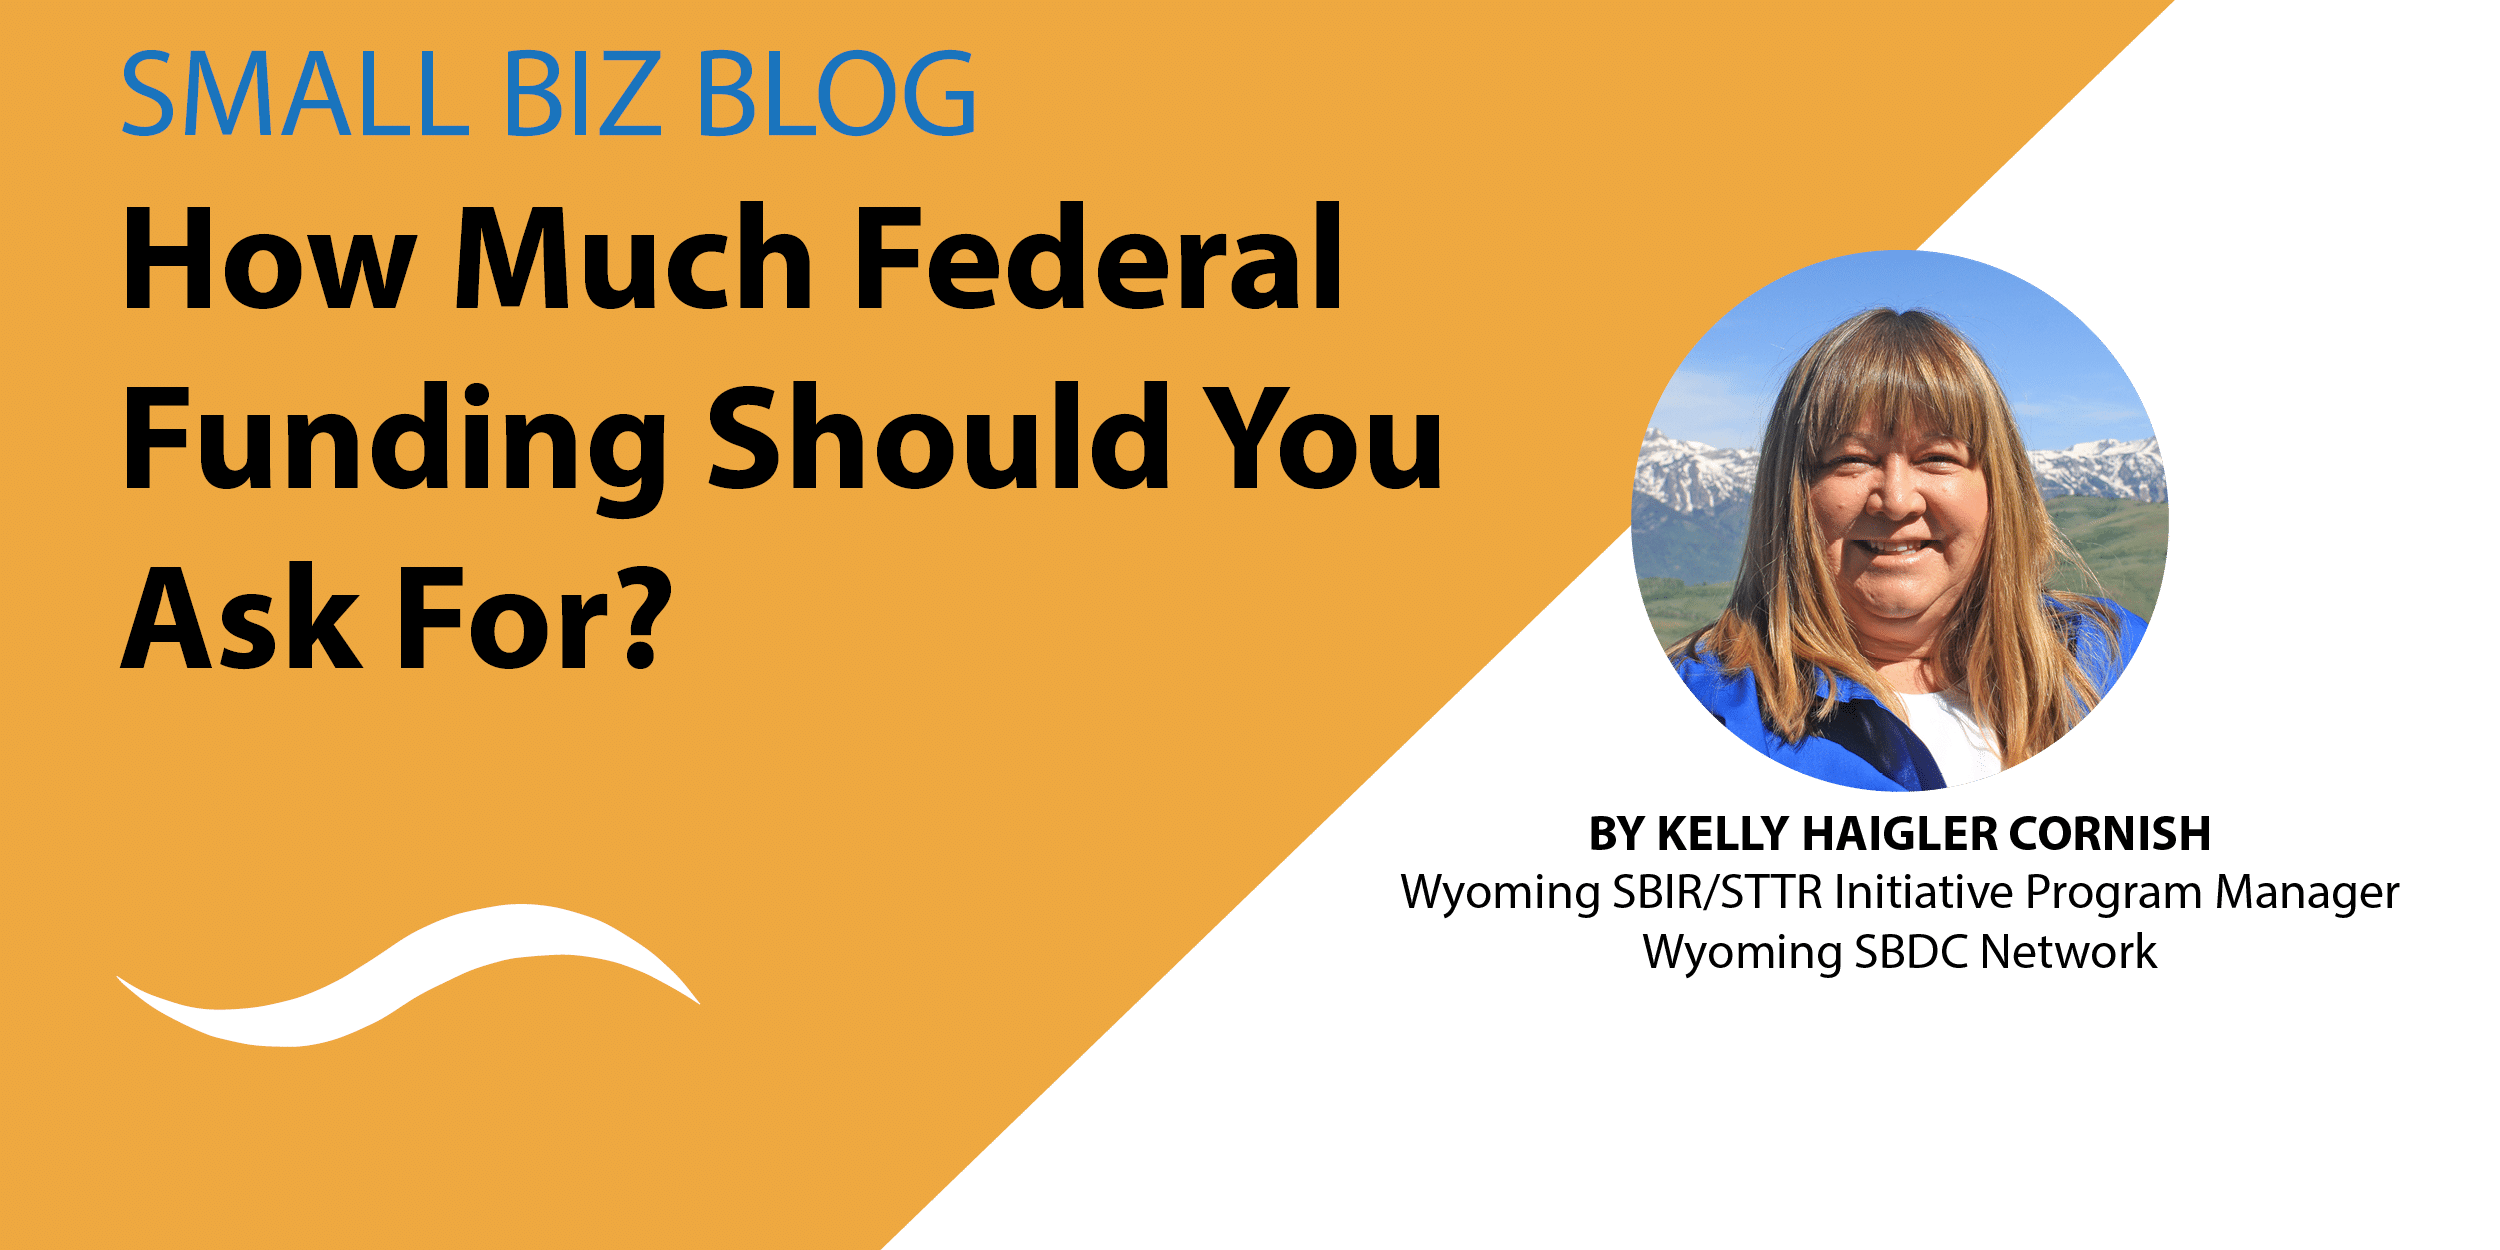 How Much Federal Funding Should You Ask For?